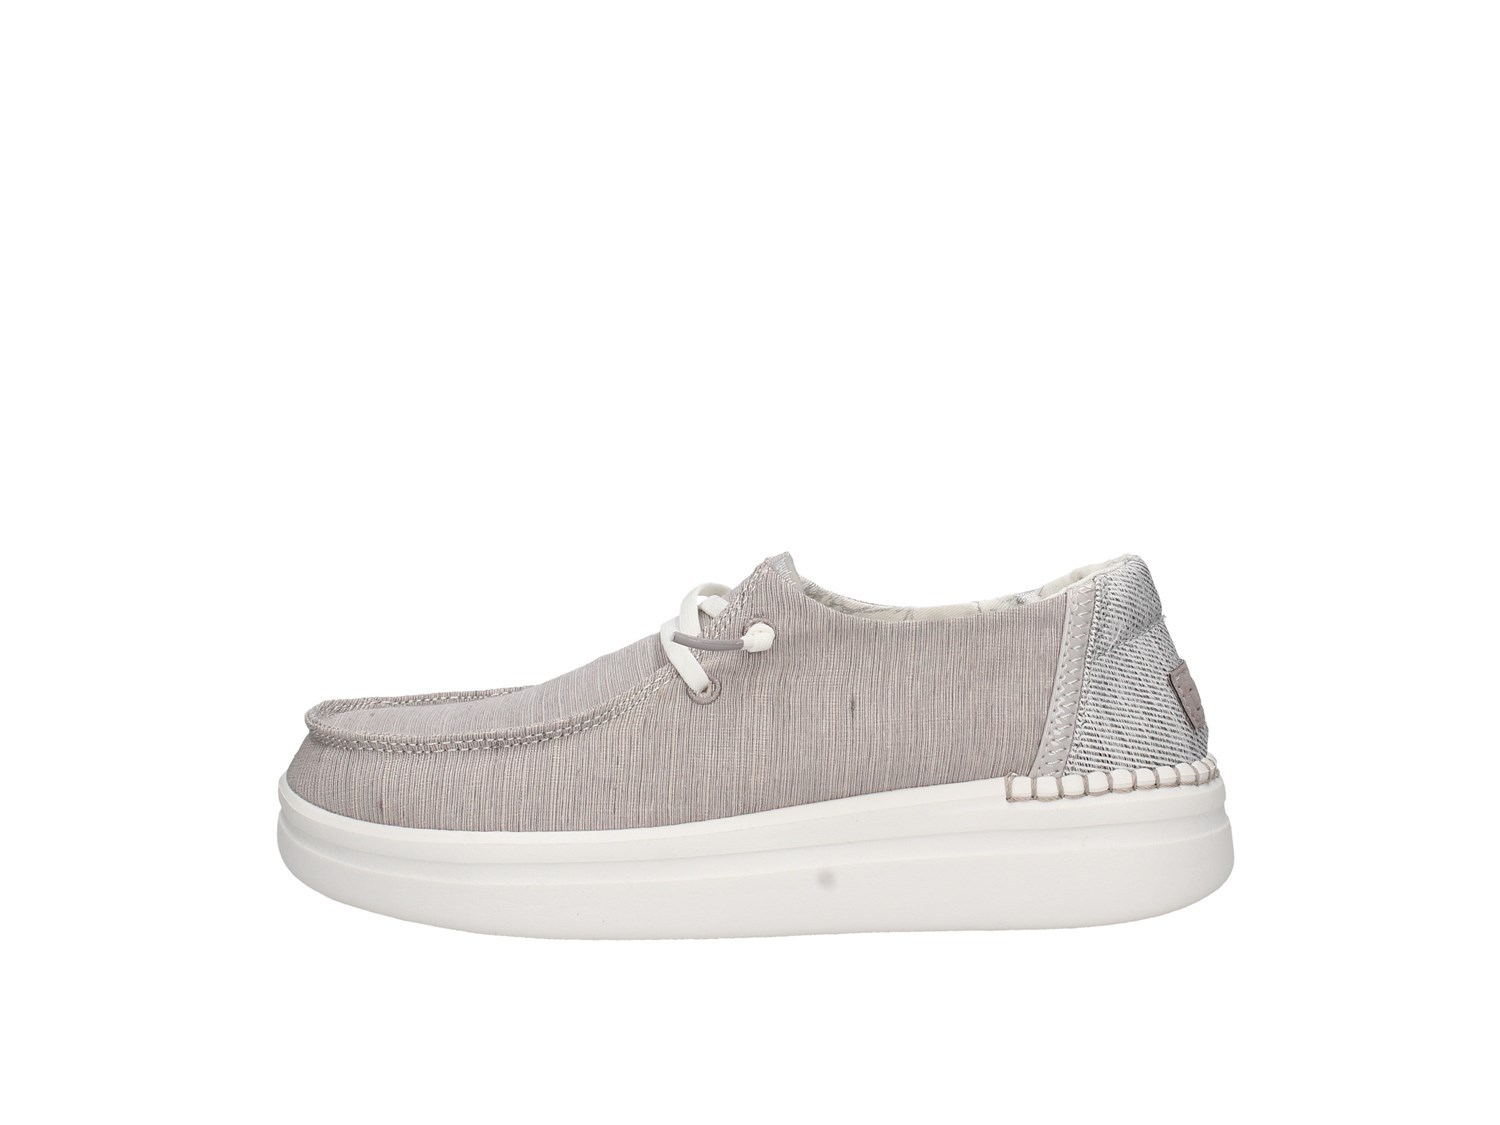 Hey Dude Wendy Rise Grey Shoes Women Moccasin